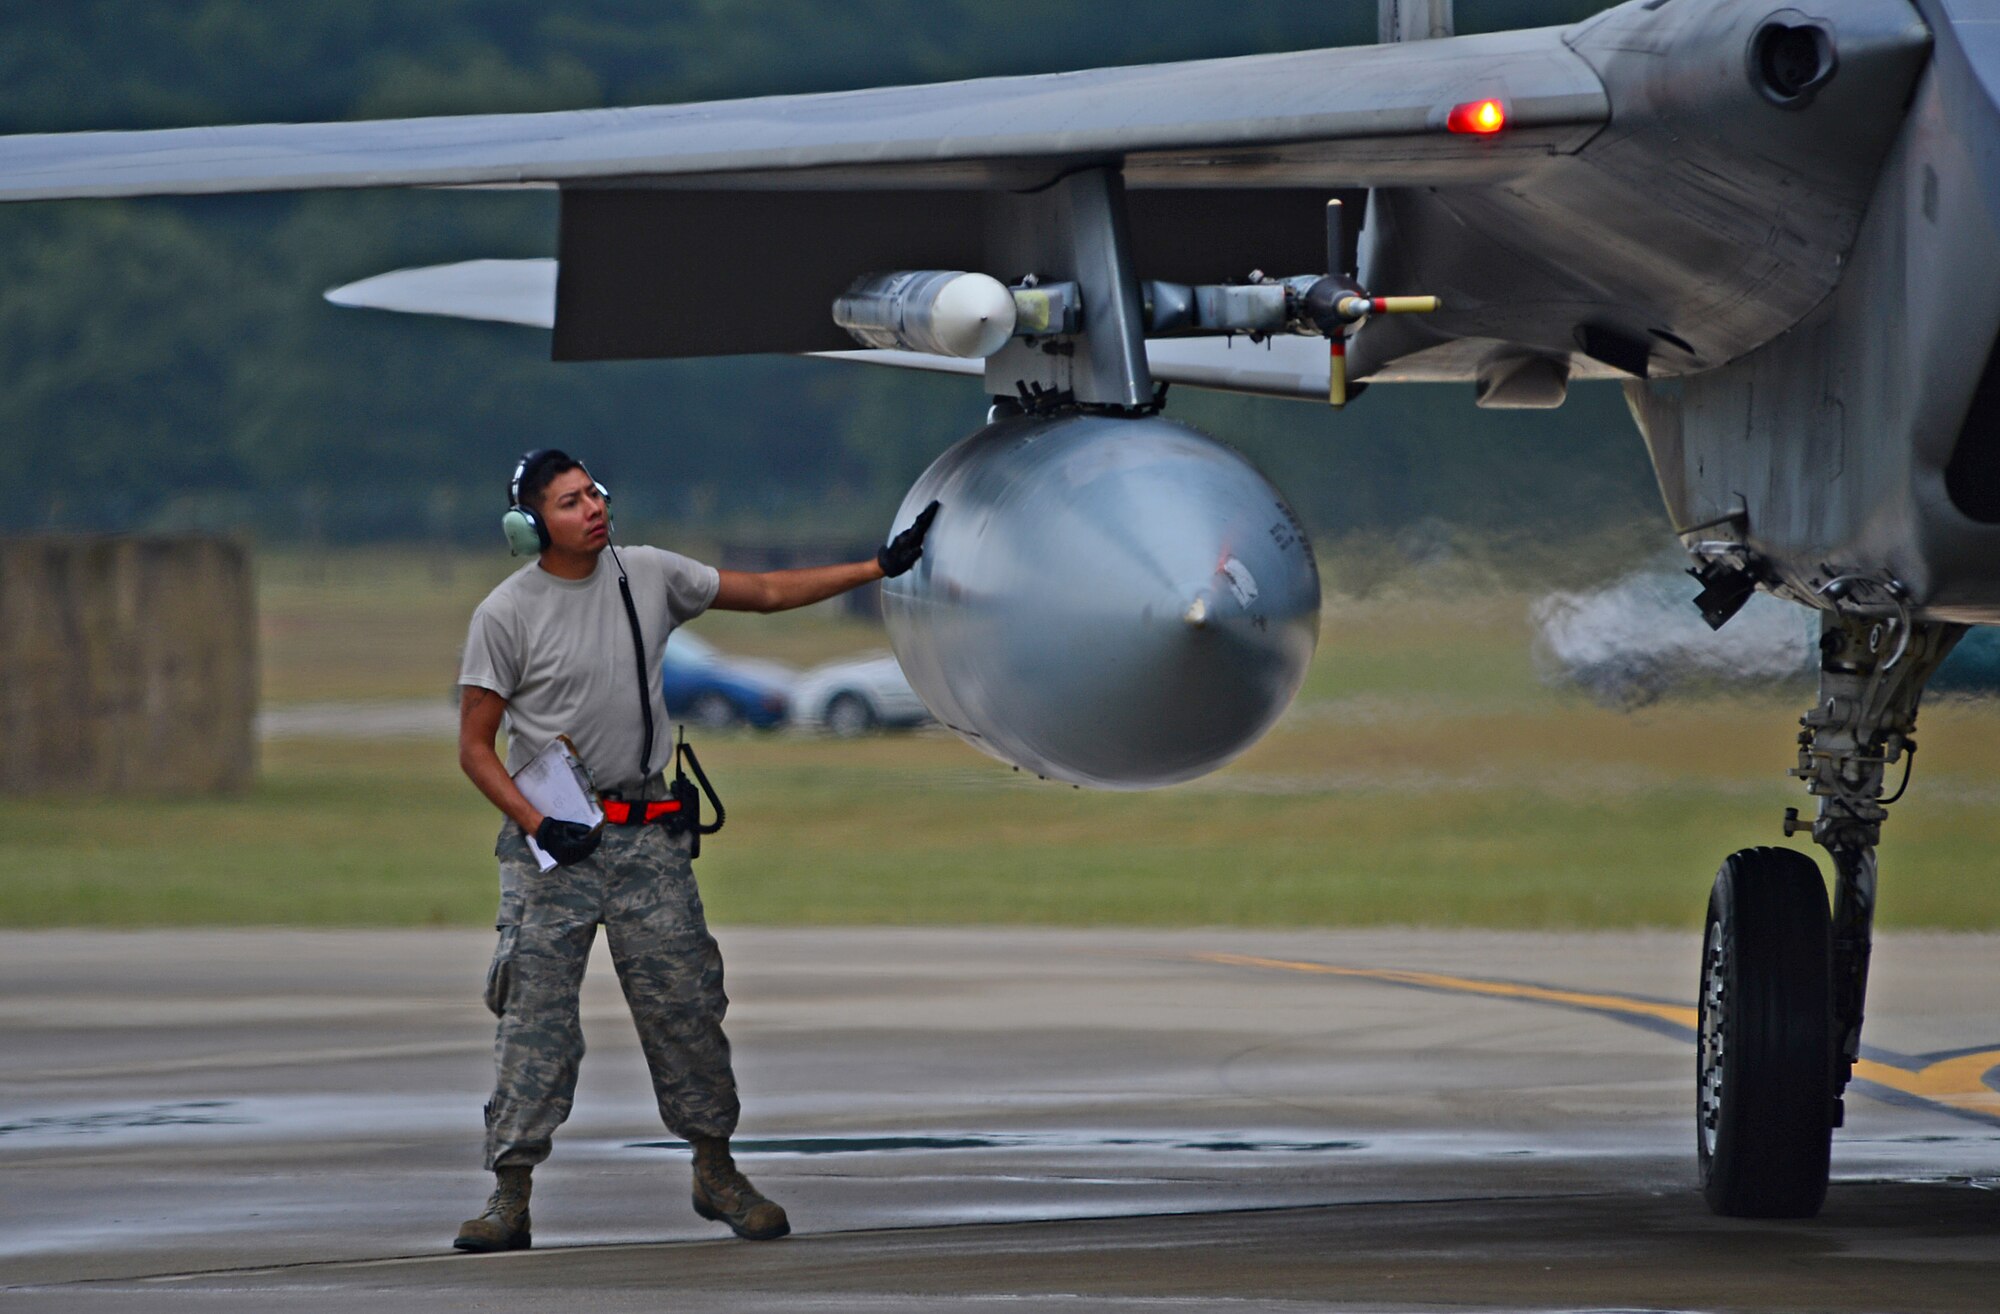 A 748th Aircraft Maintenance Squadron crew chief inspects an external fuel pod on a 493rd Fighter Squadron F-15C Eagle before it departs Royal Air Force Lakenheath, Aug. 15, 2014, to participate in bilateral training with the Bulgarian air force at Graf Ignatievo Air Base, Bulgaria. The 48th Fighter Wing operates under U.S. Air Forces in Europe’s philosophy of remaining Forward, Ready, Now by providing a continuous presence in Europe. This allows the U.S. Air Force to work with allies and partners to develop and improve ready air forces capable of maintaining regional security. (U.S. Air Force photo by Airman 1st Class Erin O’Shea/Released)